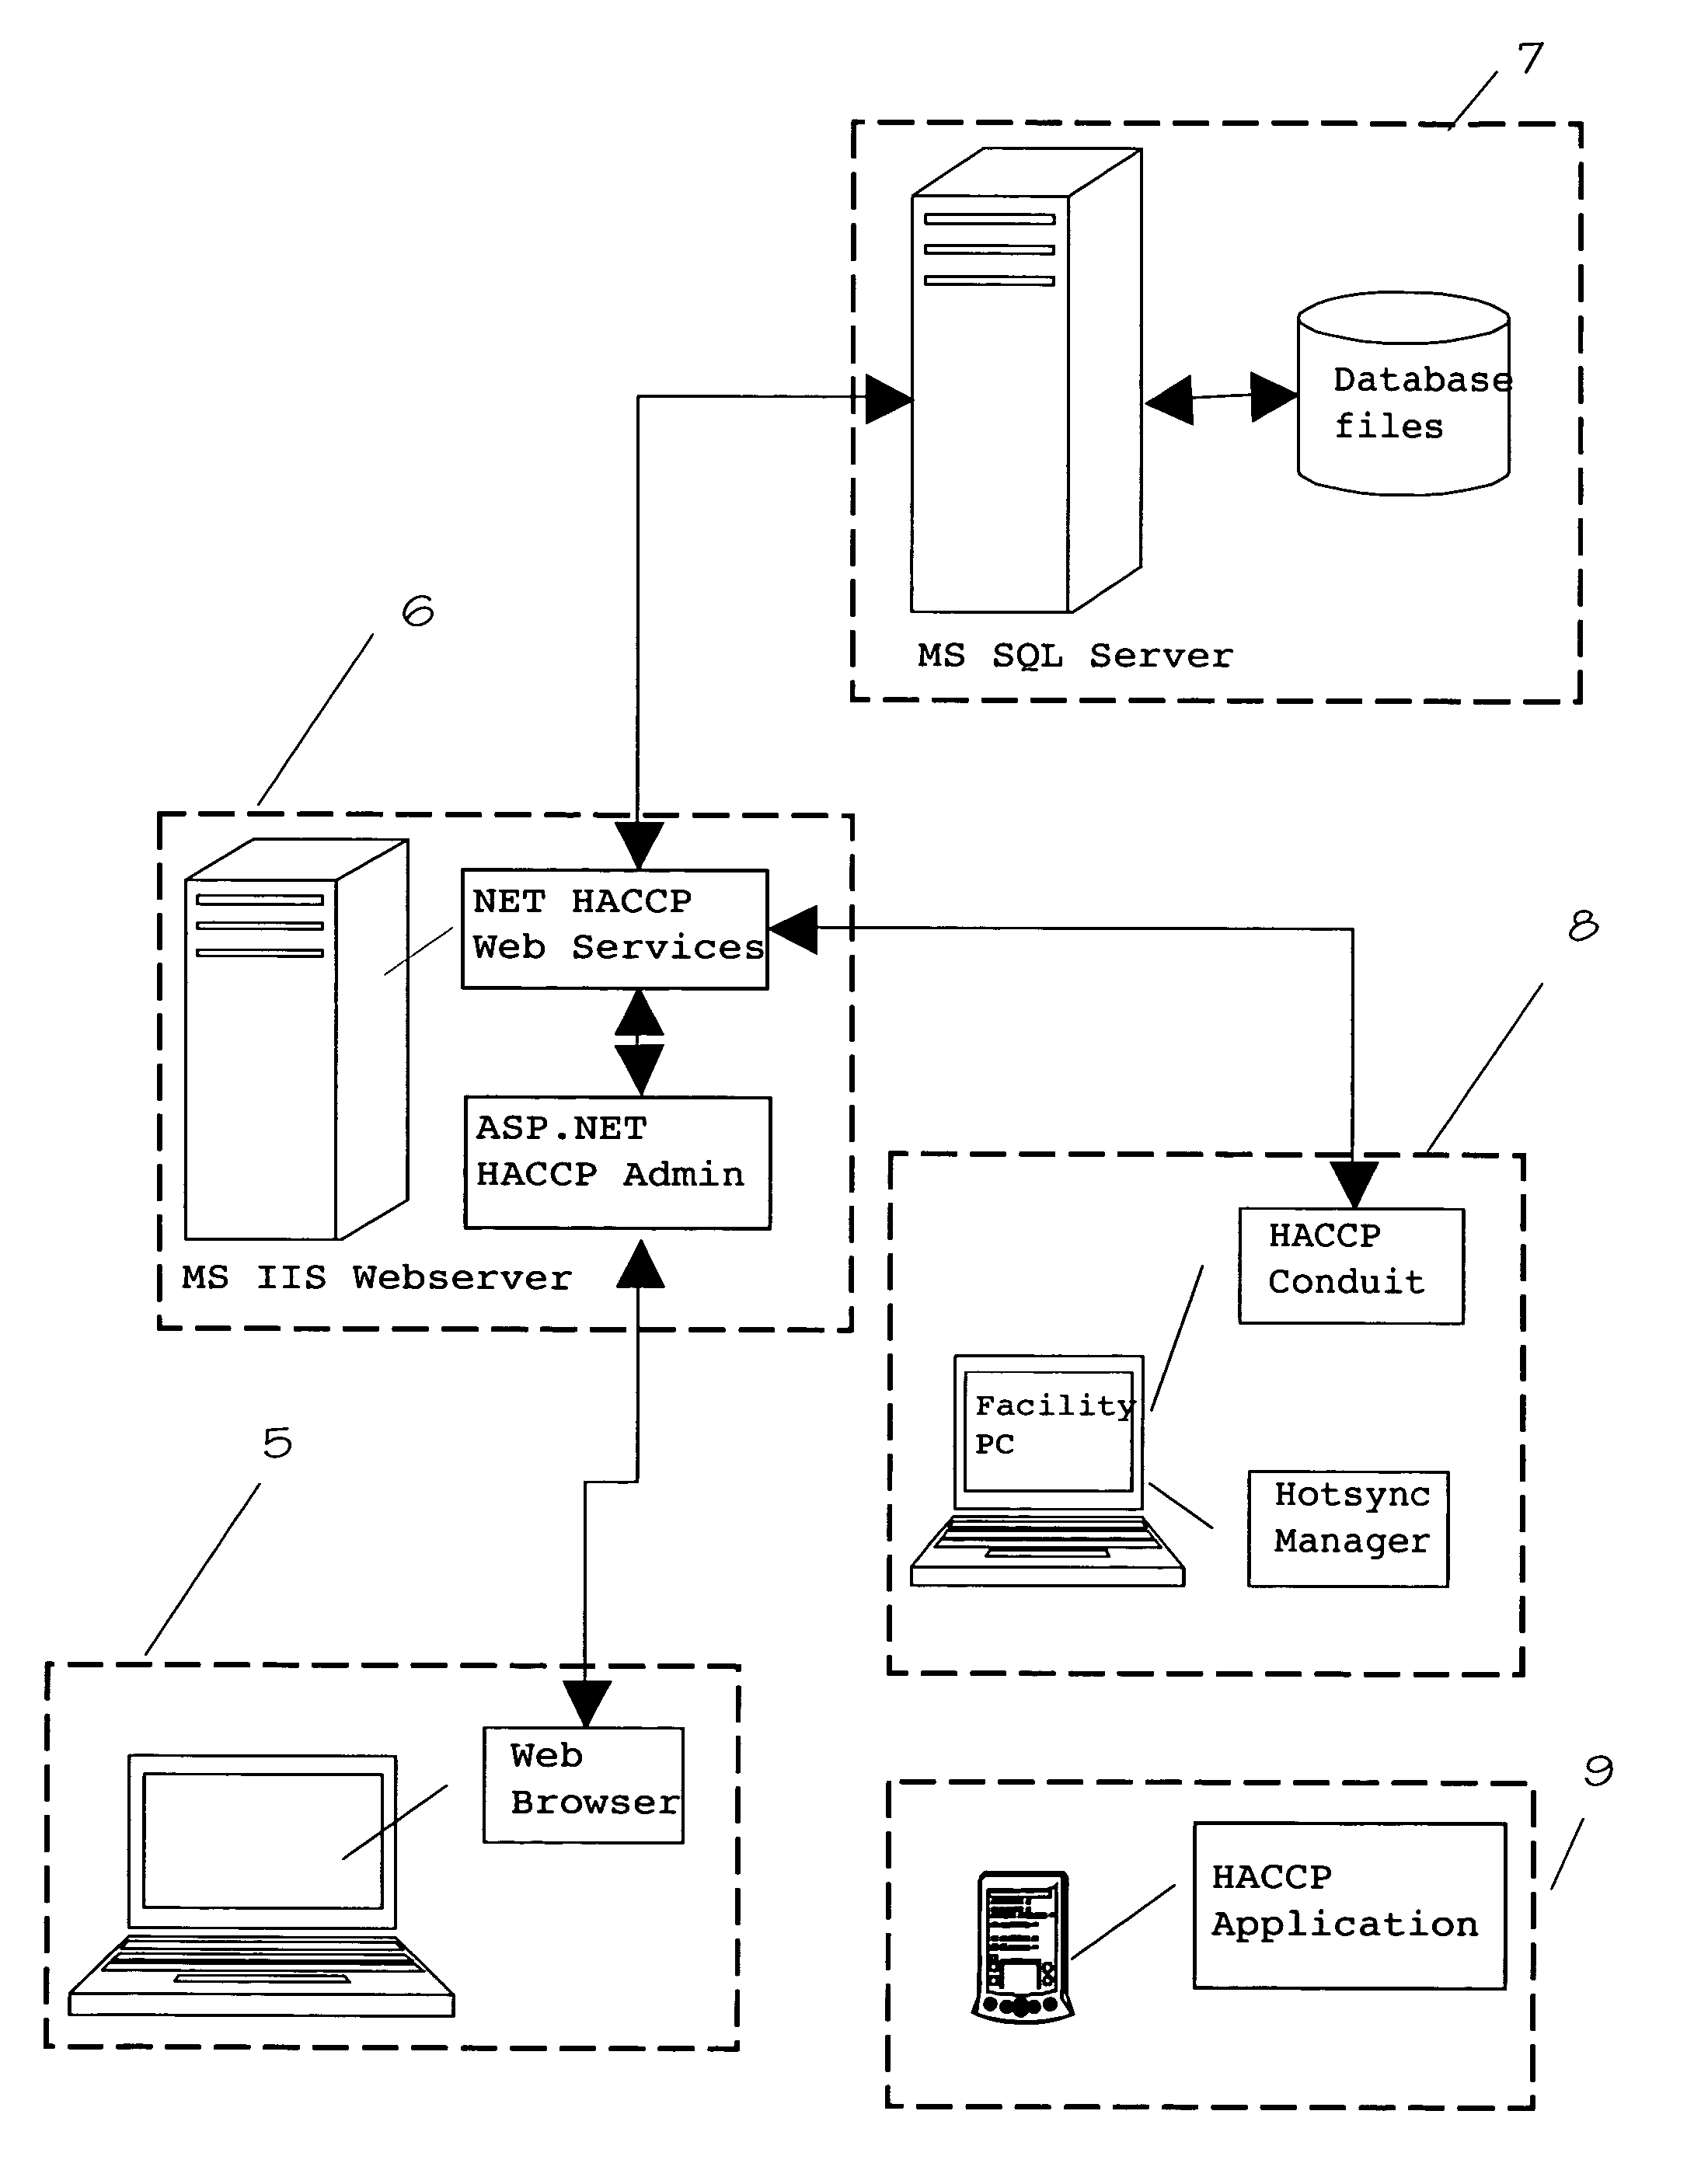 System and method for implementing HACCP process and control at a plurality of food service establishments via the internet